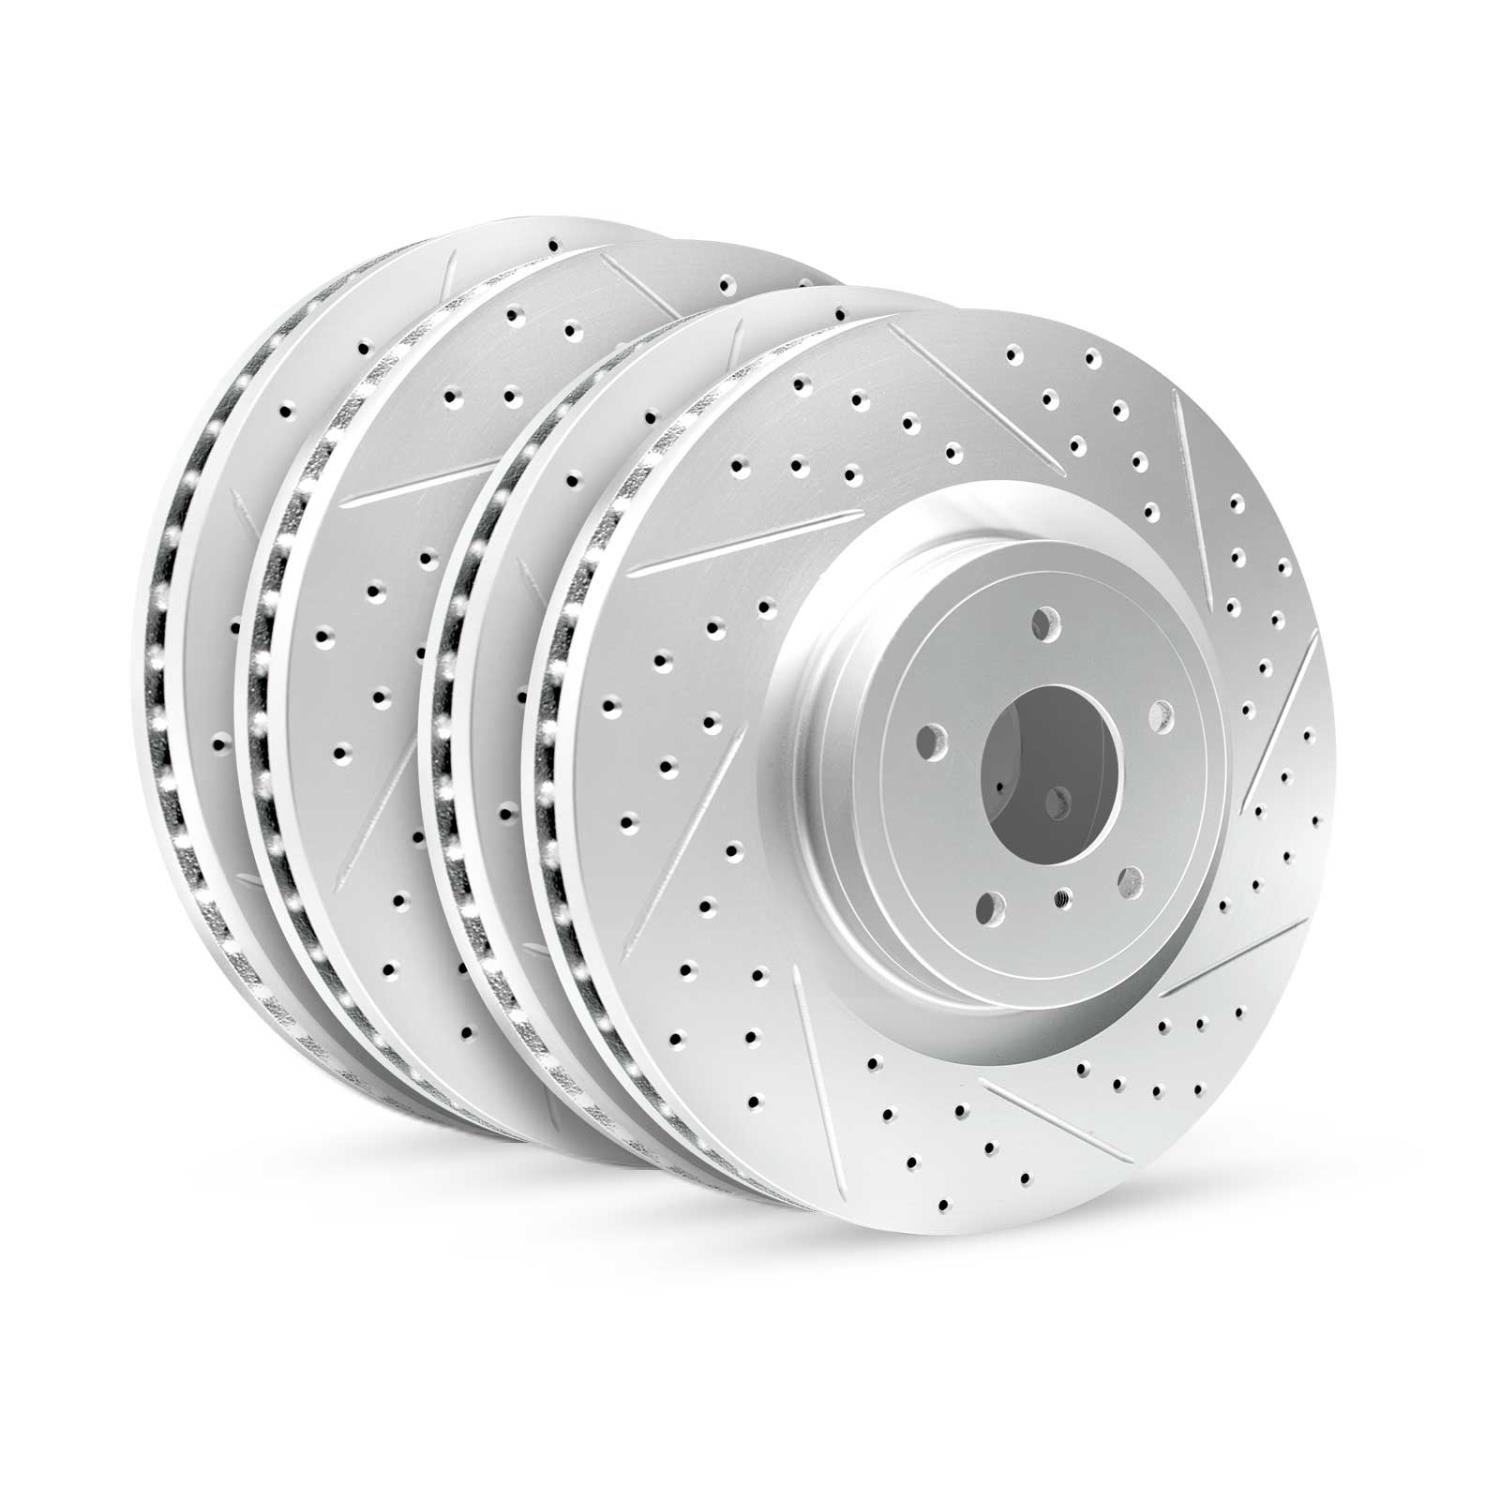 GEO-Carbon Drilled/Slotted Rotors, 1984-1995 Mercedes-Benz,